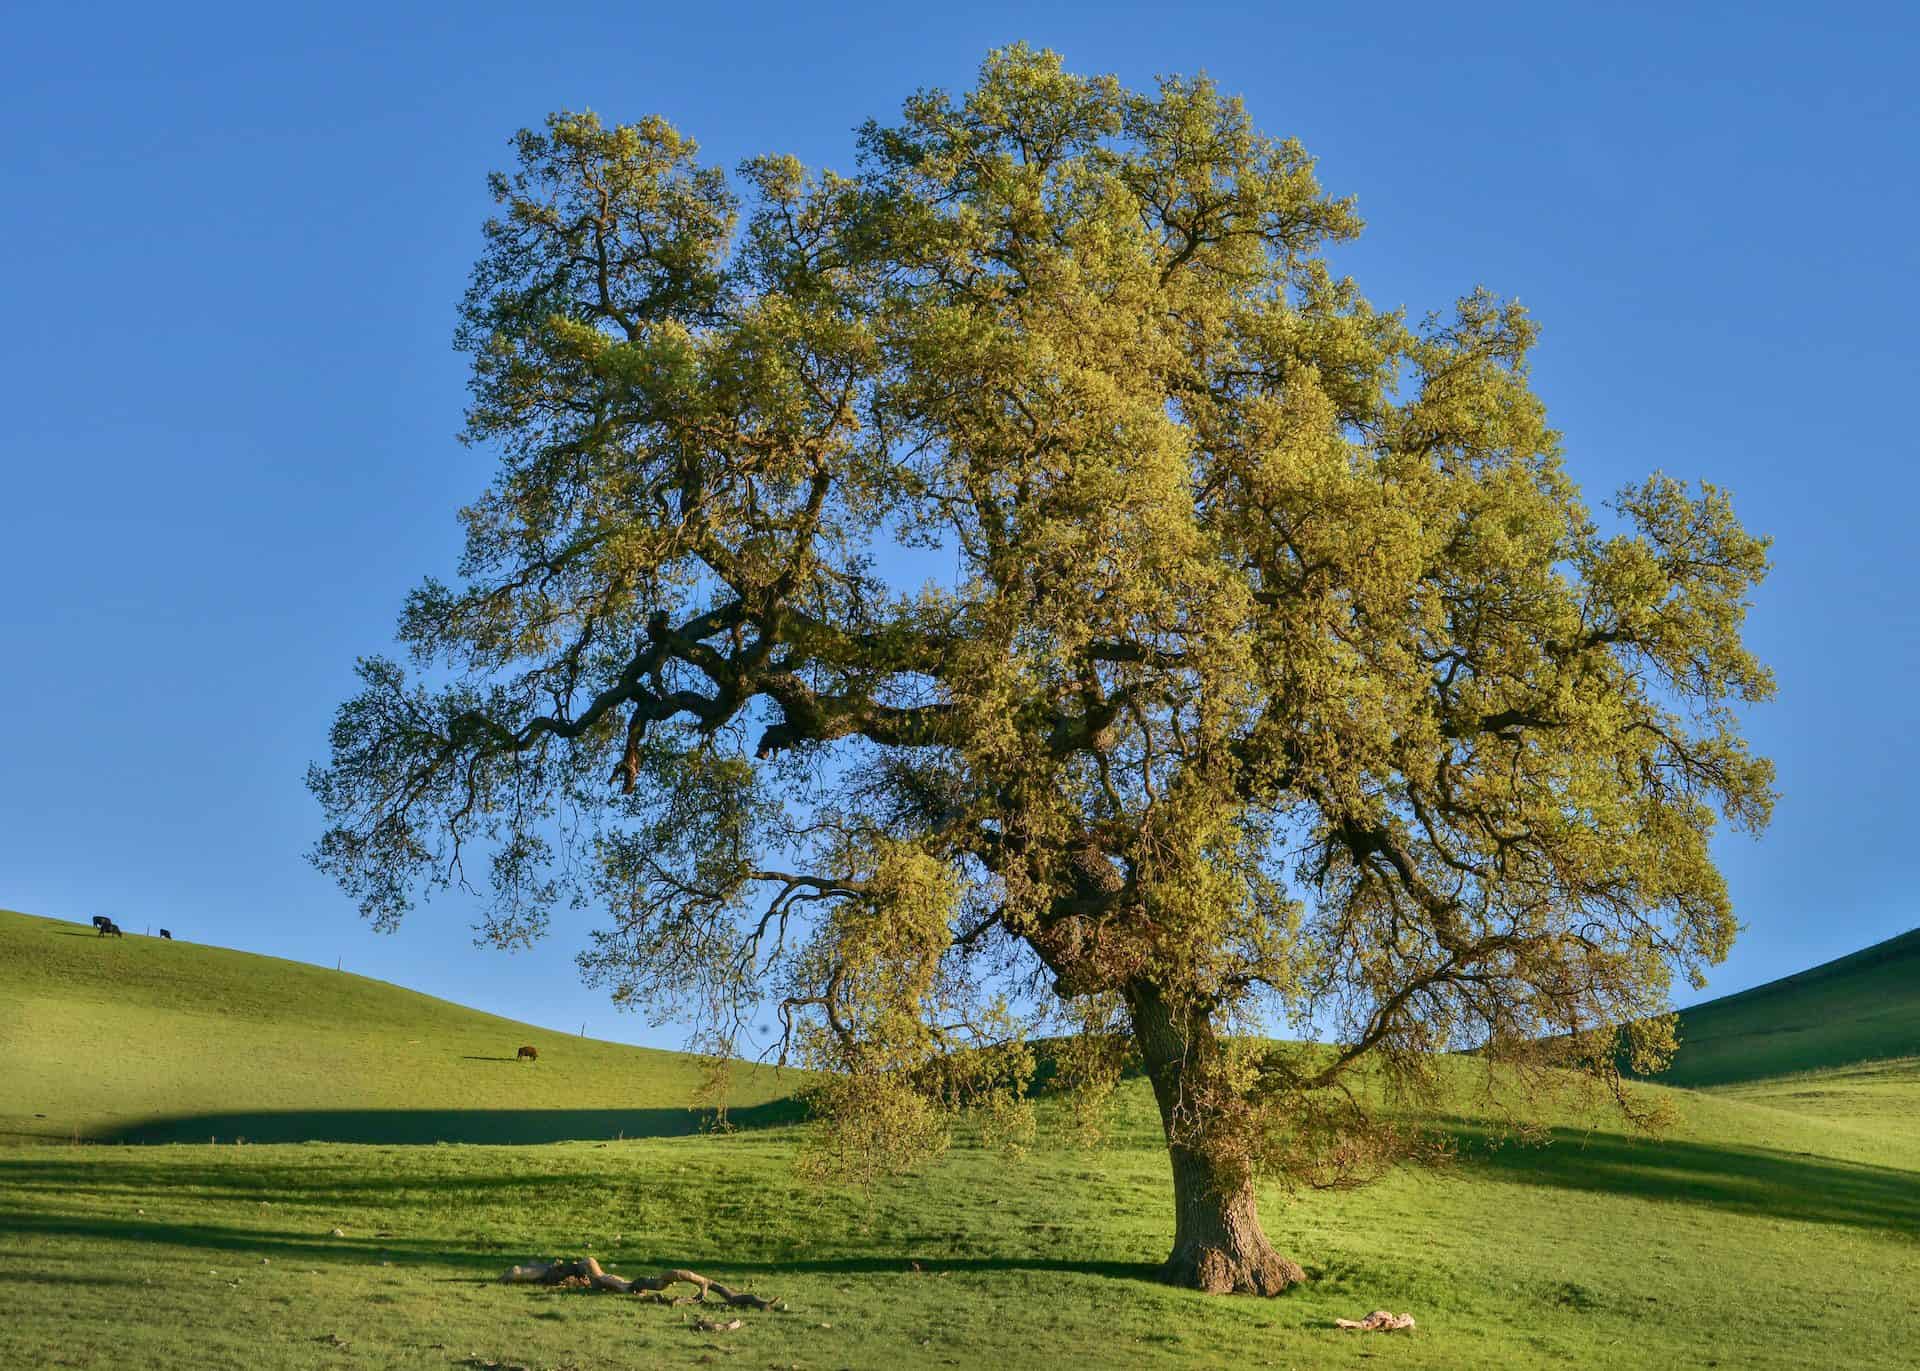 A majestic oak tree stands on a vibrant green hillside under a clear blue sky.